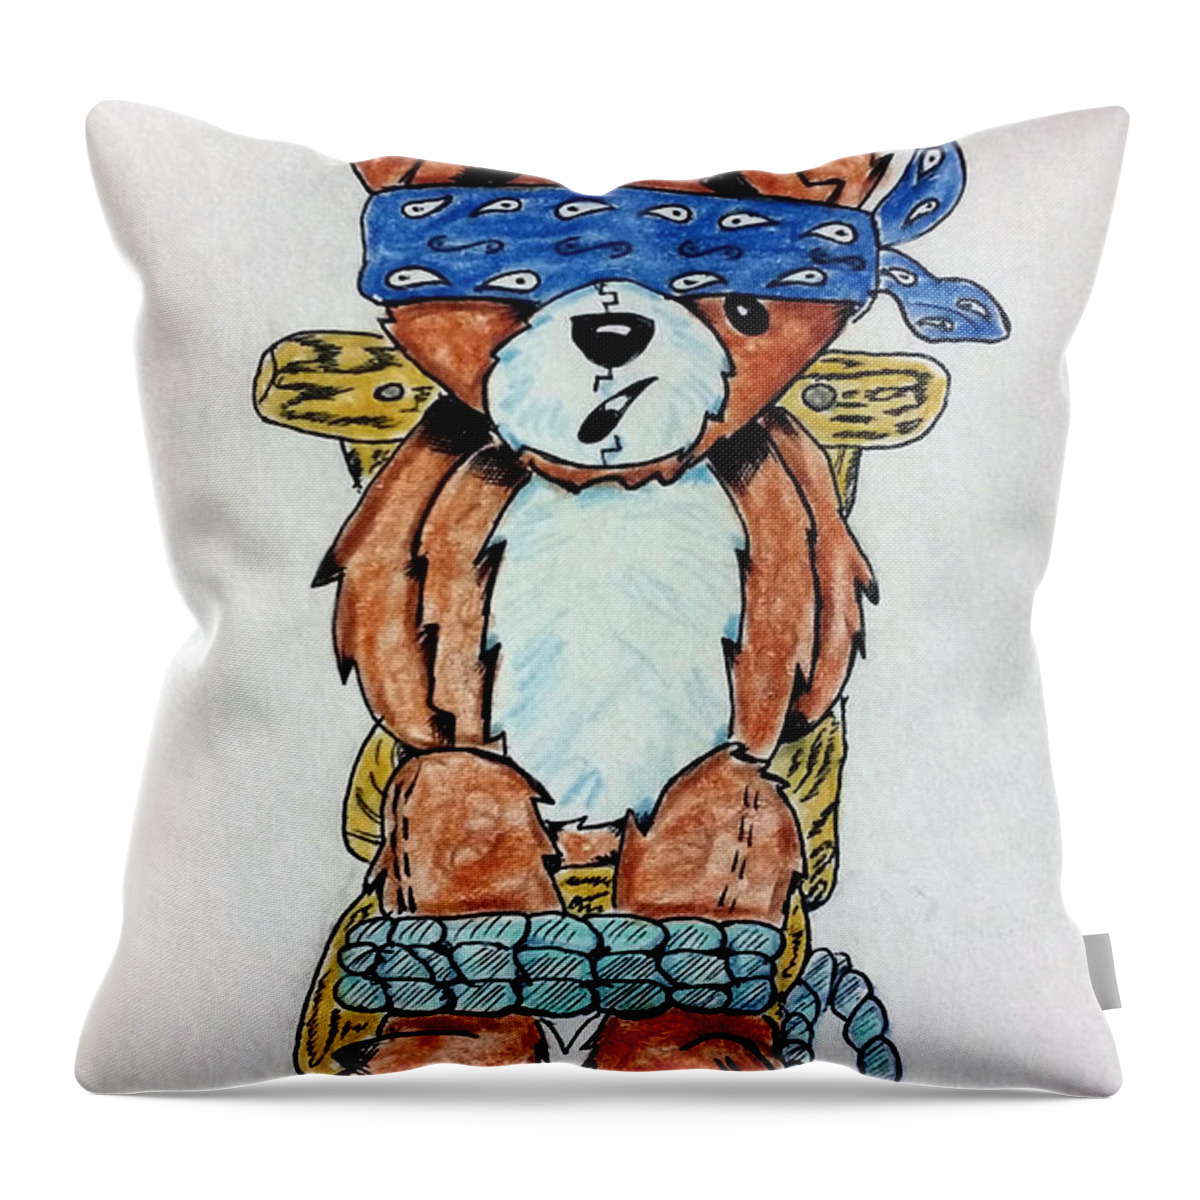 Black Art Throw Pillow featuring the drawing Untitled 5 by Joedee